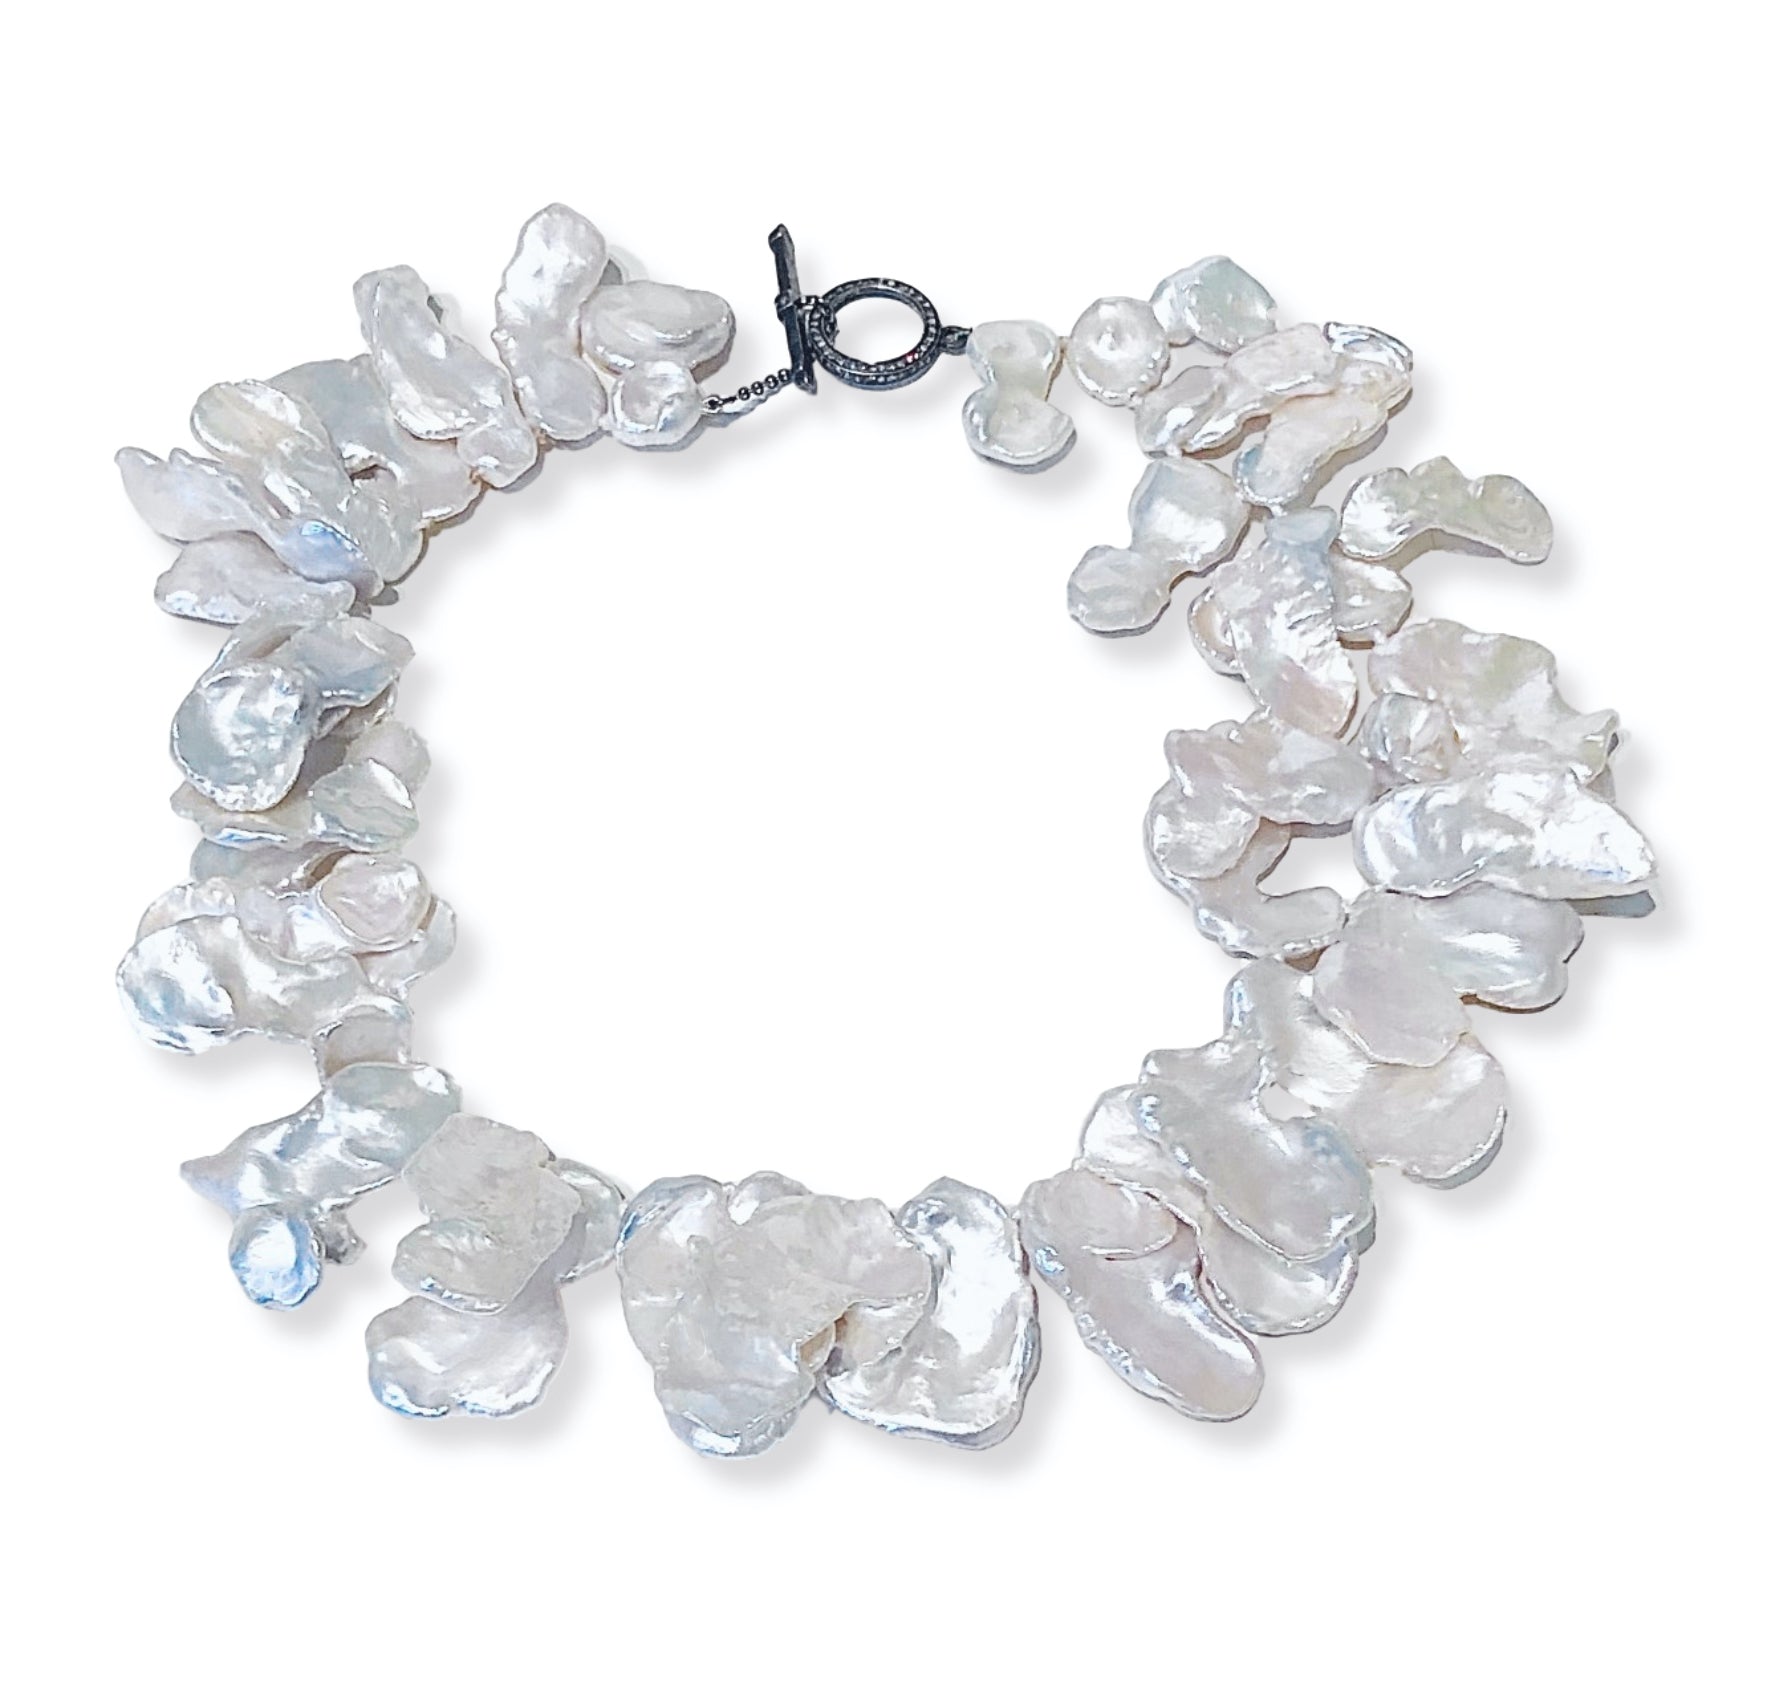 Keshi Pearl Necklace with Diamond Clasp